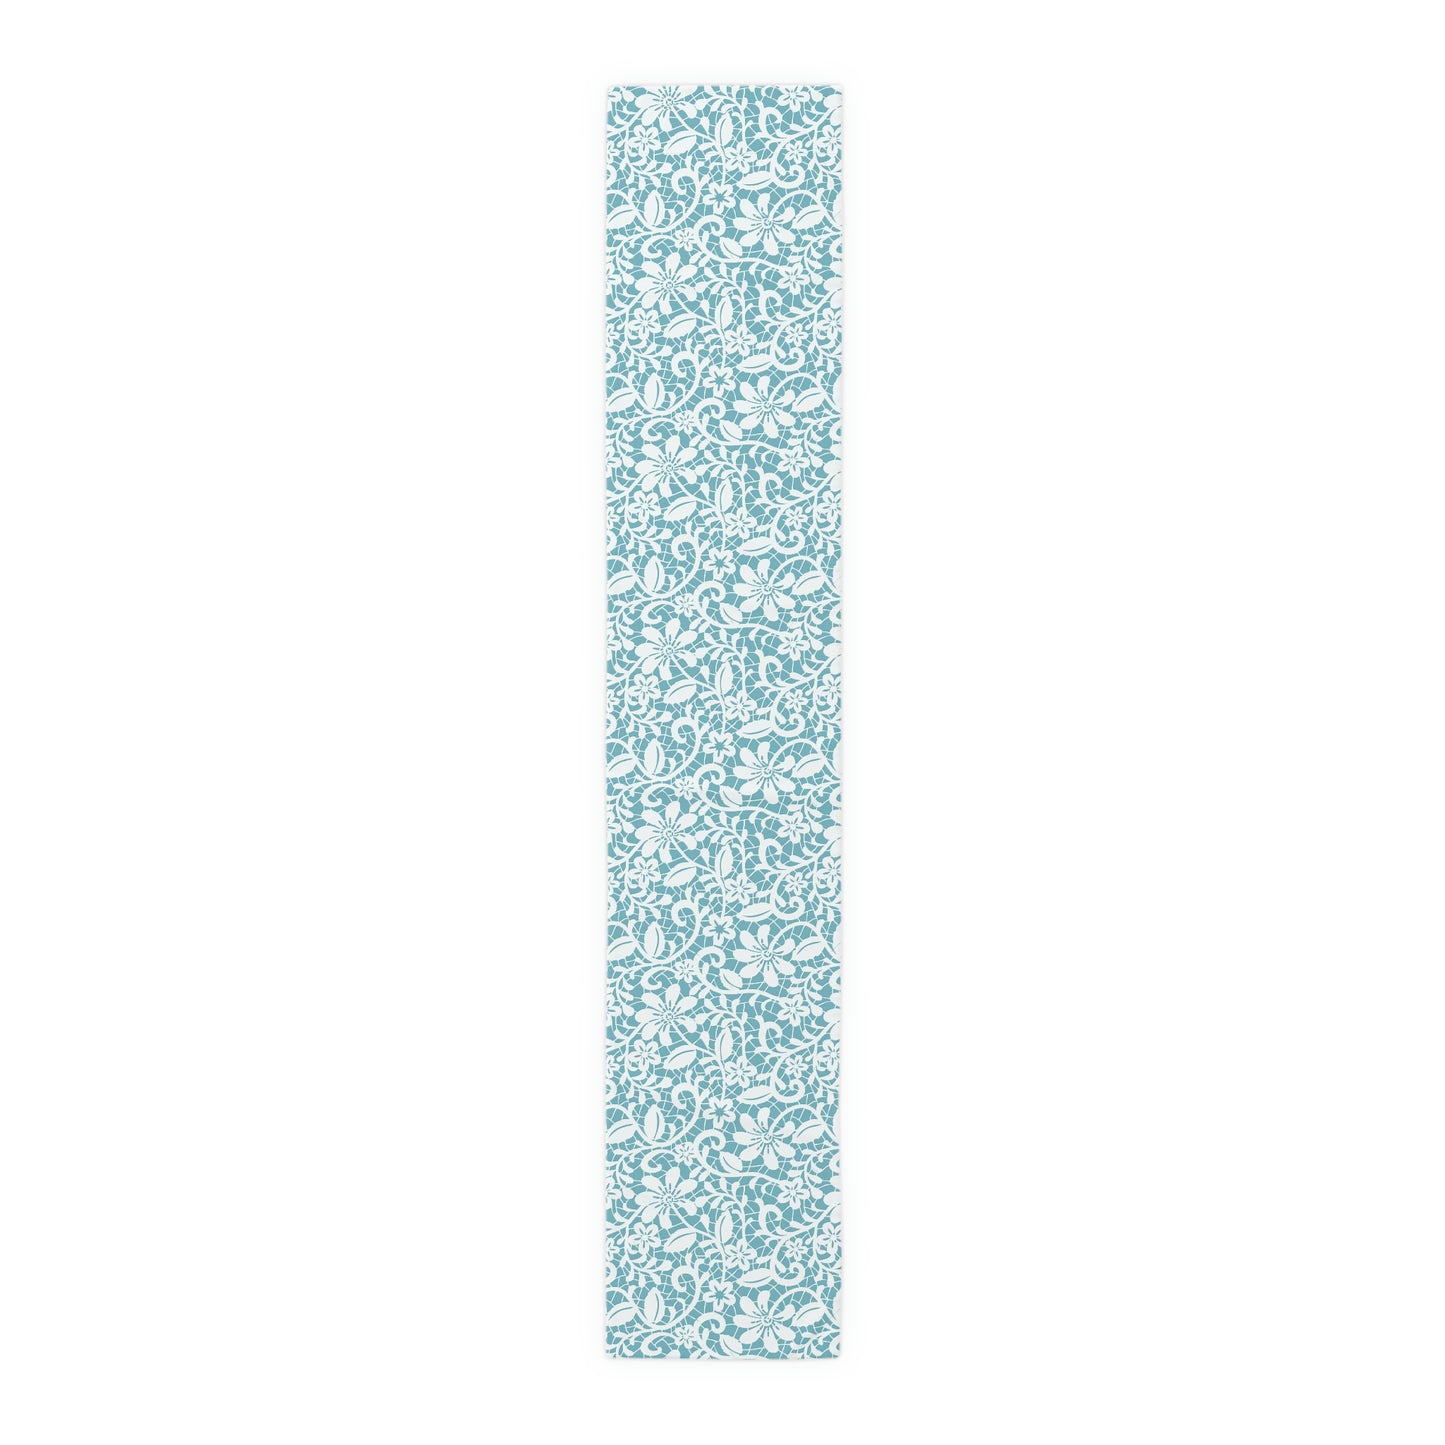 Blue Floral Table Runner / Floral Table Decor